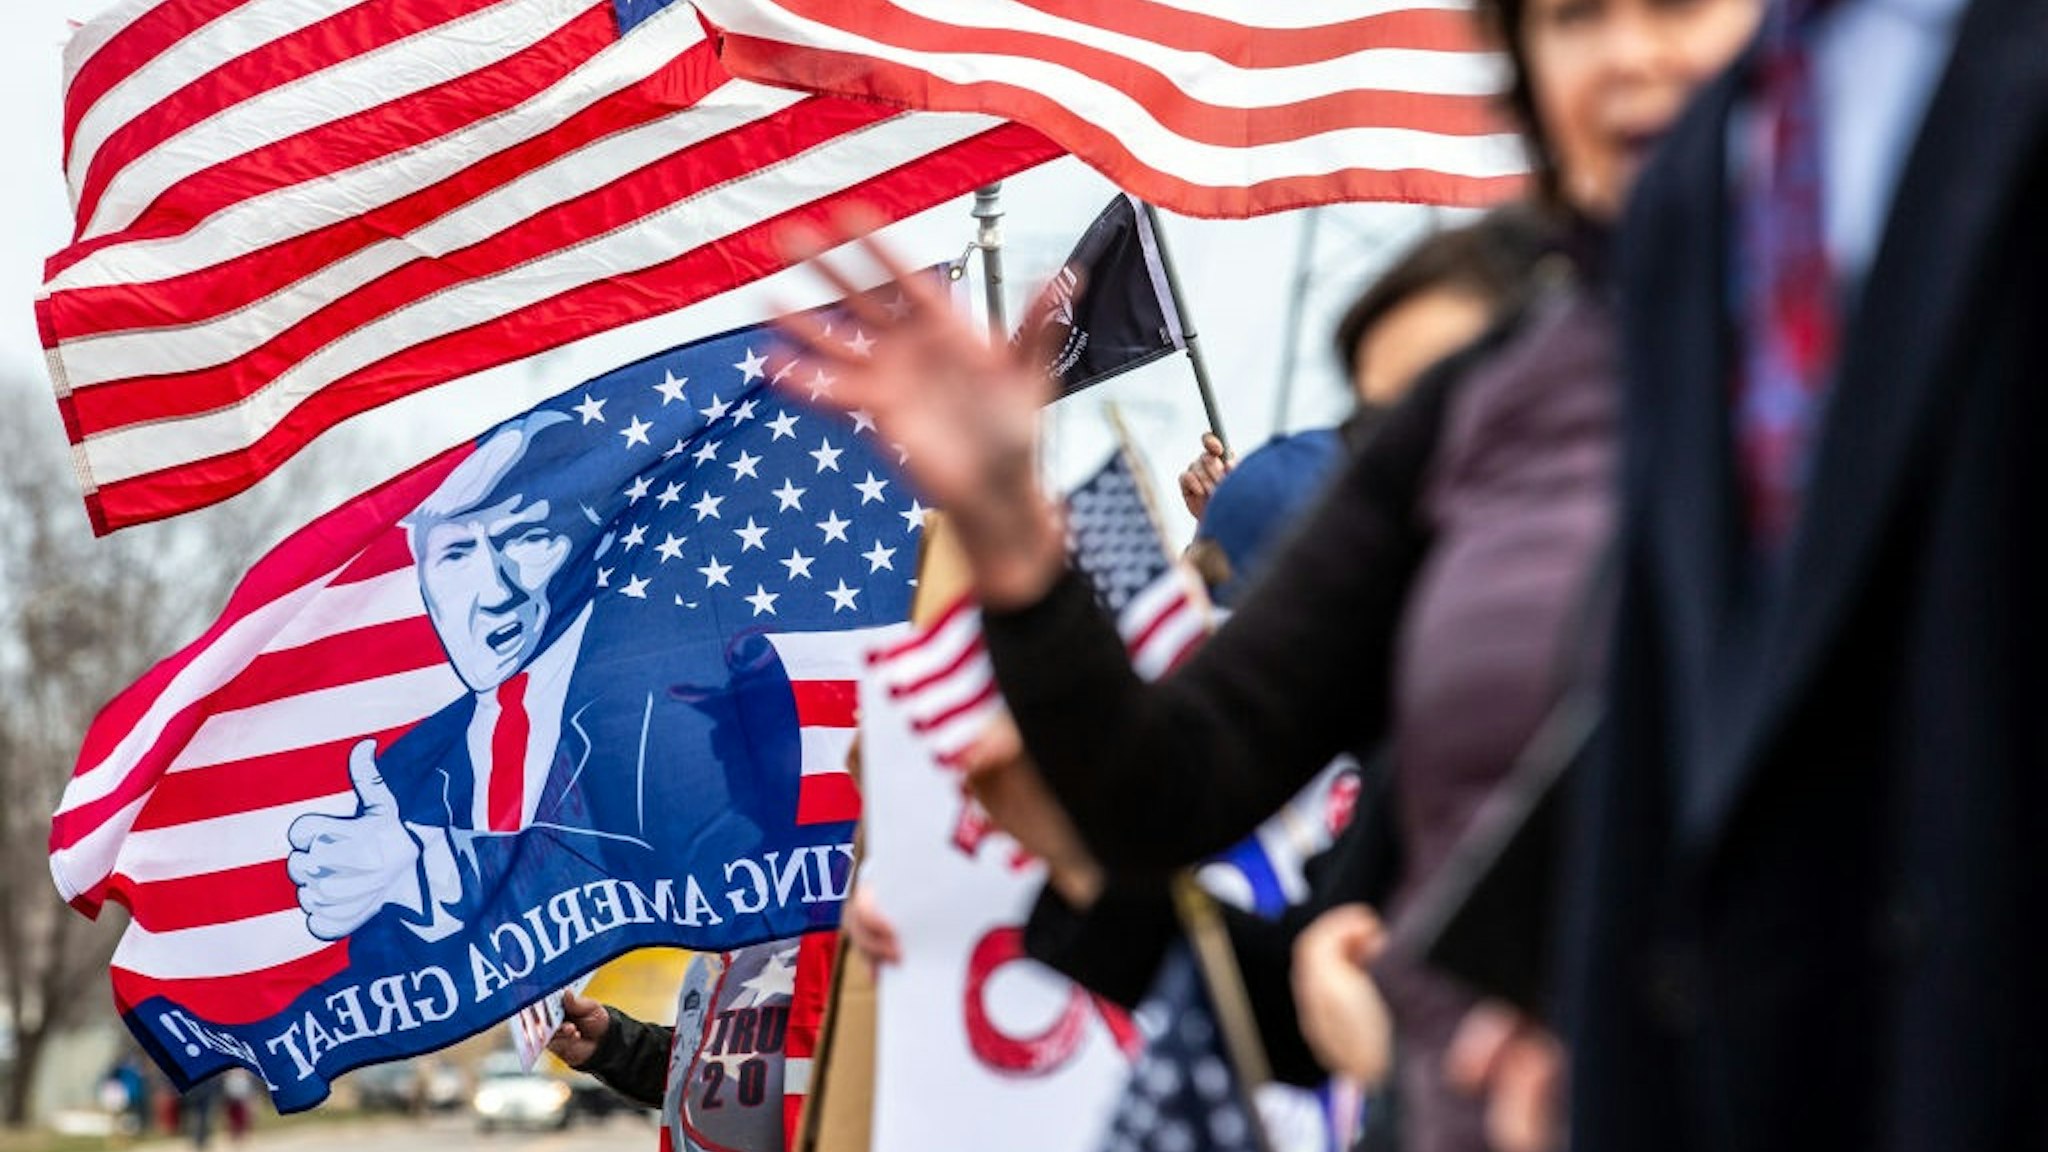 Trump supporters display US flags and signs as the Minnesota chapter of the Council on American-Islamic Relations (CAIR-MN) and a coalition of community organizations in support of Minnesota Representative Ilhan Omar gathered outside the Nuss Truck and Equipment in Burnsville, Minnesota where US President Donald Trump spoke on April 15, 2019.